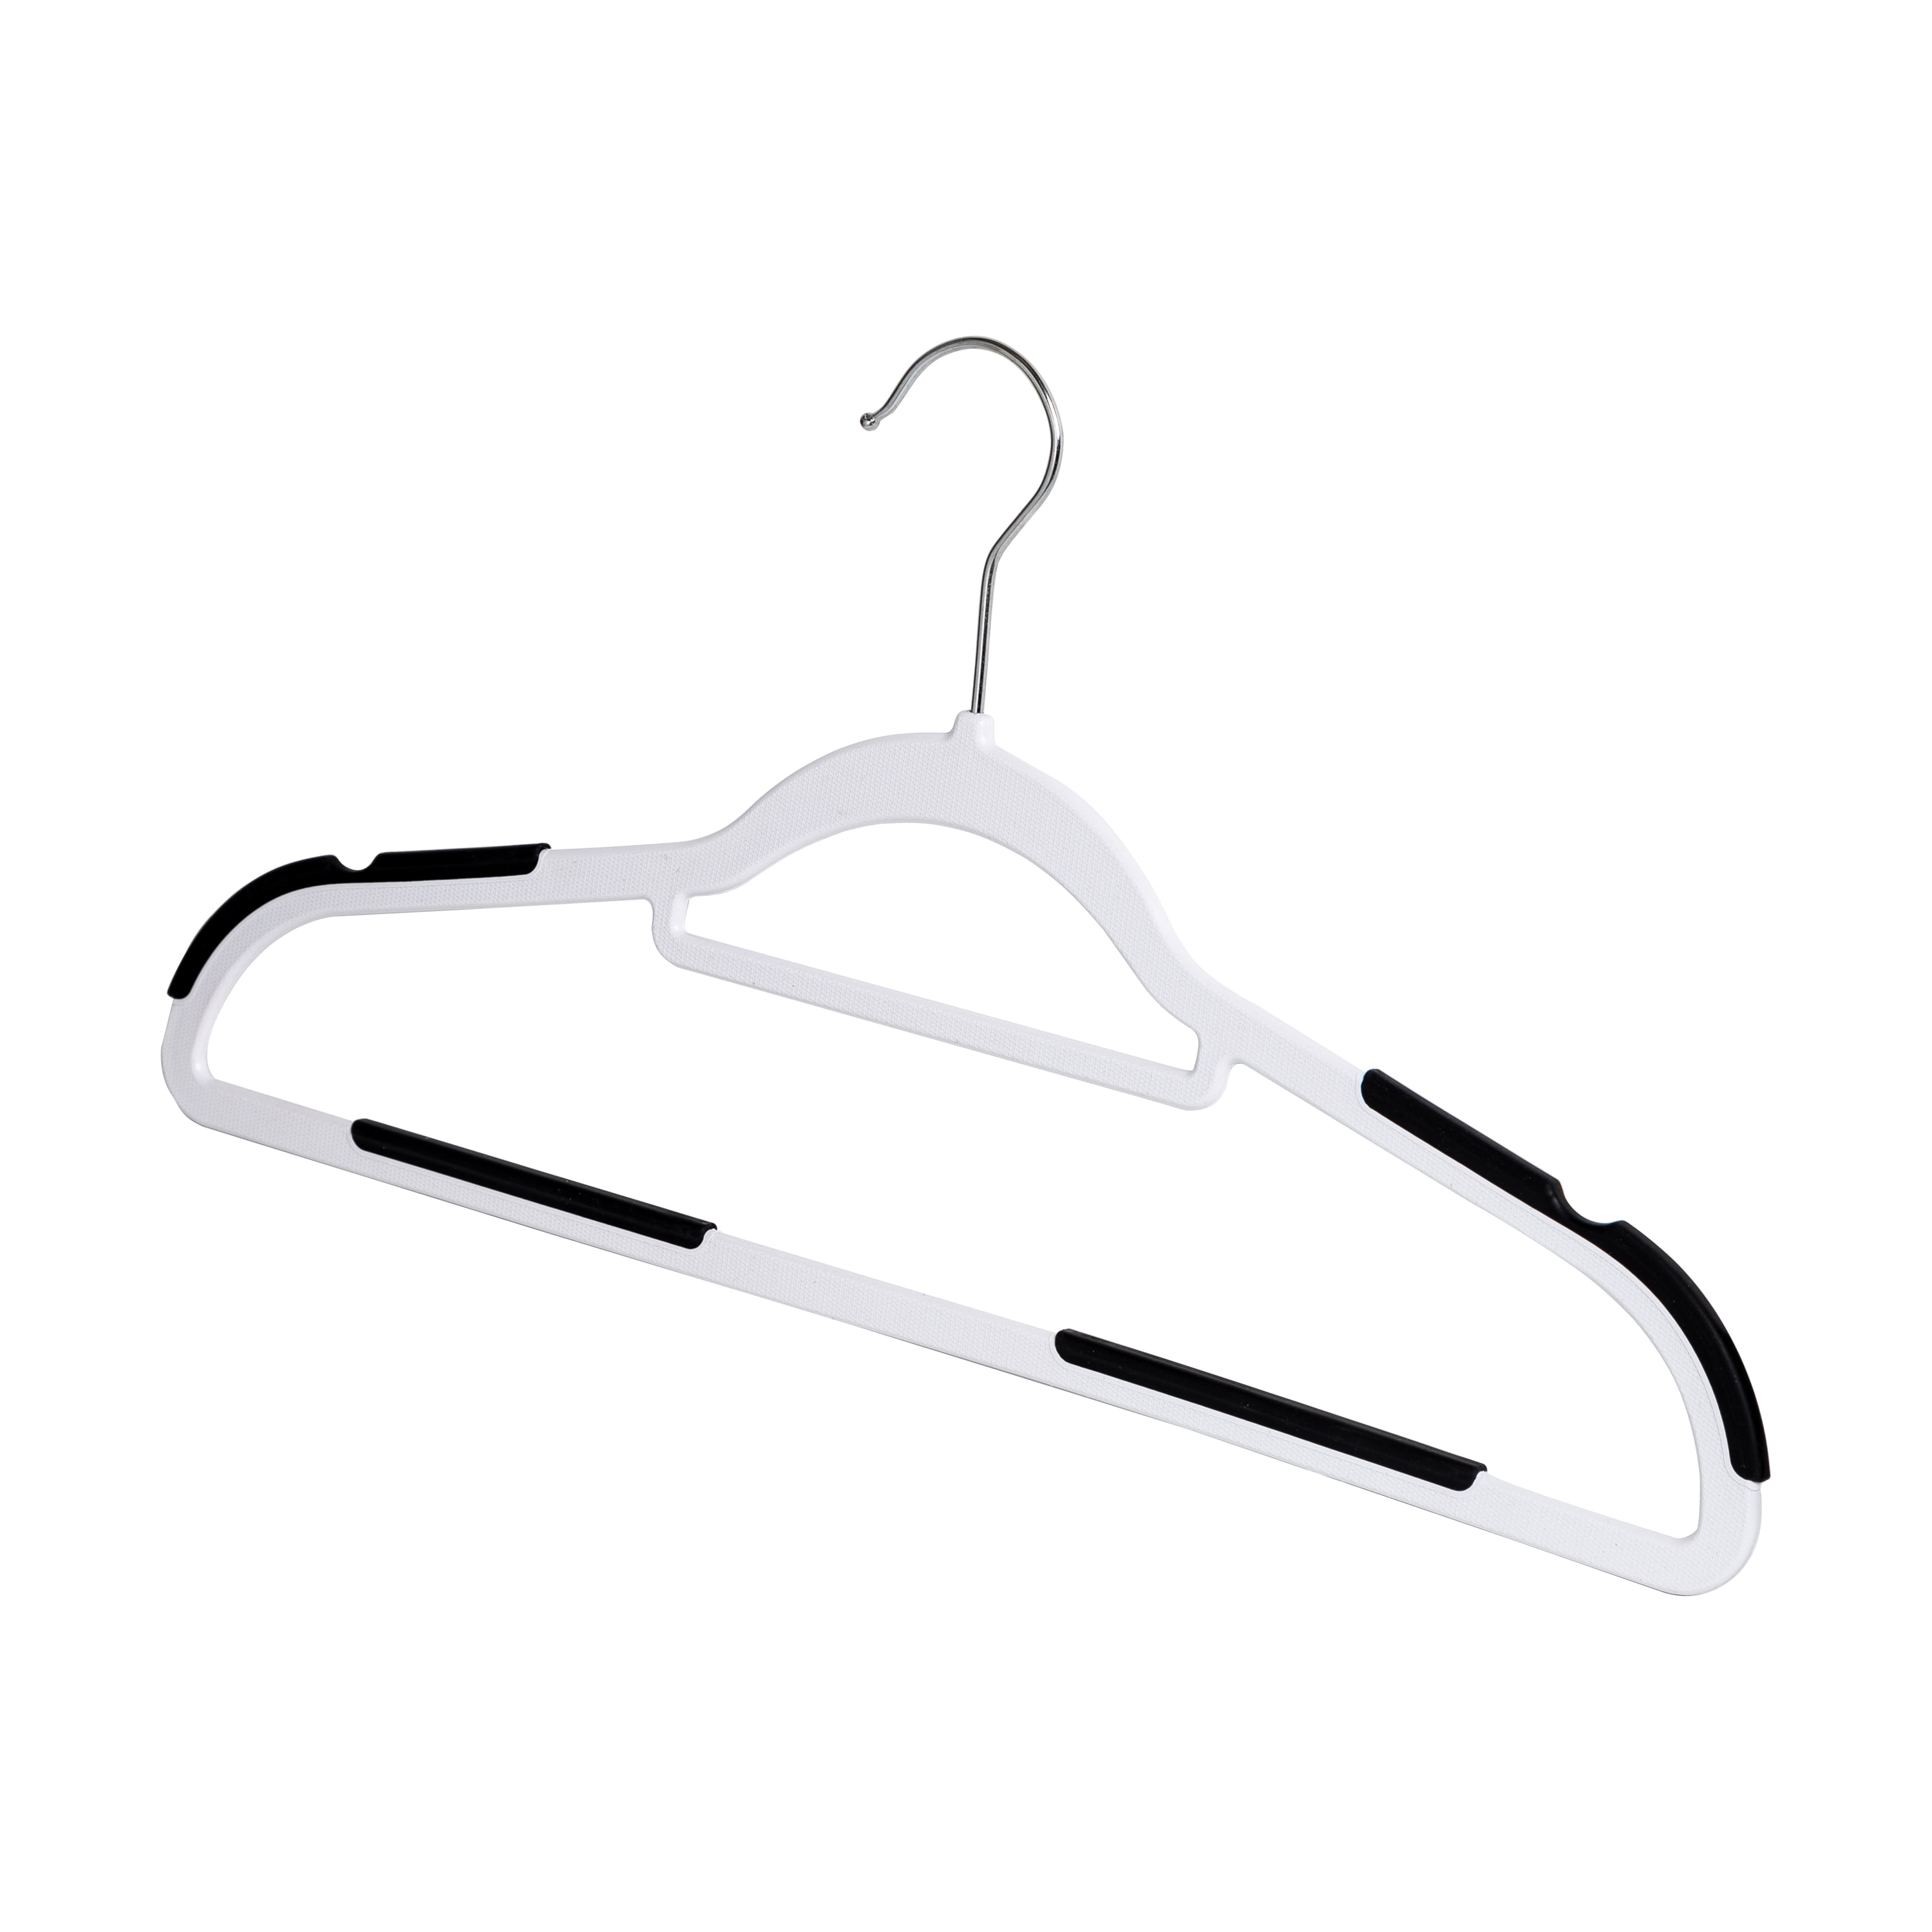 Neaties Plastic Clothes Hangers, 30 Pack, White, Lightweight, Slim, Heavy  Duty, Smooth Finish, Durable, Tough, Double Bar Hooks, Snag-Free, Non-Slip